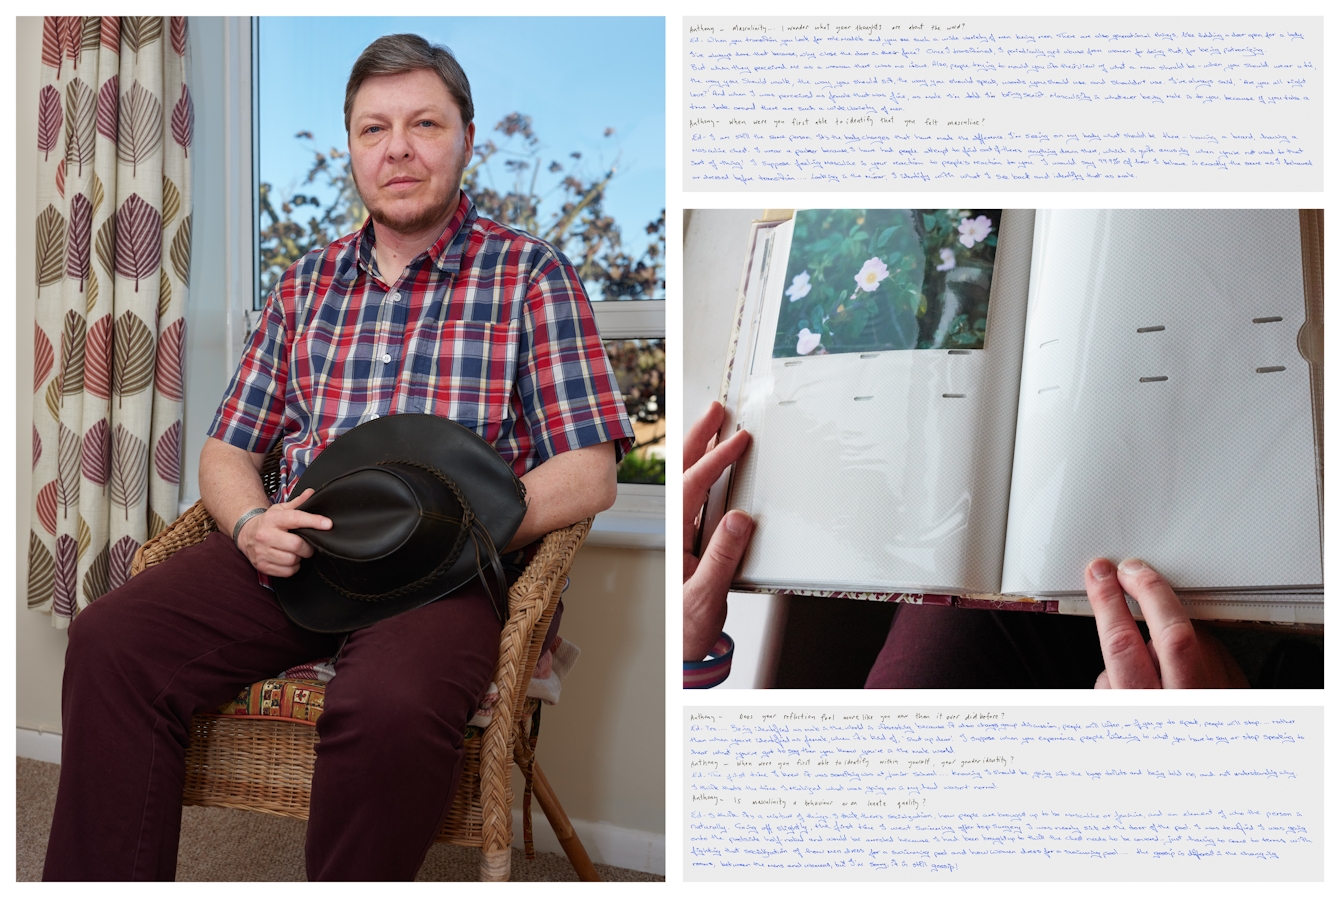 Photograph of an individual sat on a chair in a room, in front of a window. They are looking straight to camera, holding a hat in their hands. Behind them are curtains with a leave motif. To the right of this photograph is another photograph showing a hand holding a family photo. Above and below this image are images of handwritten texts.